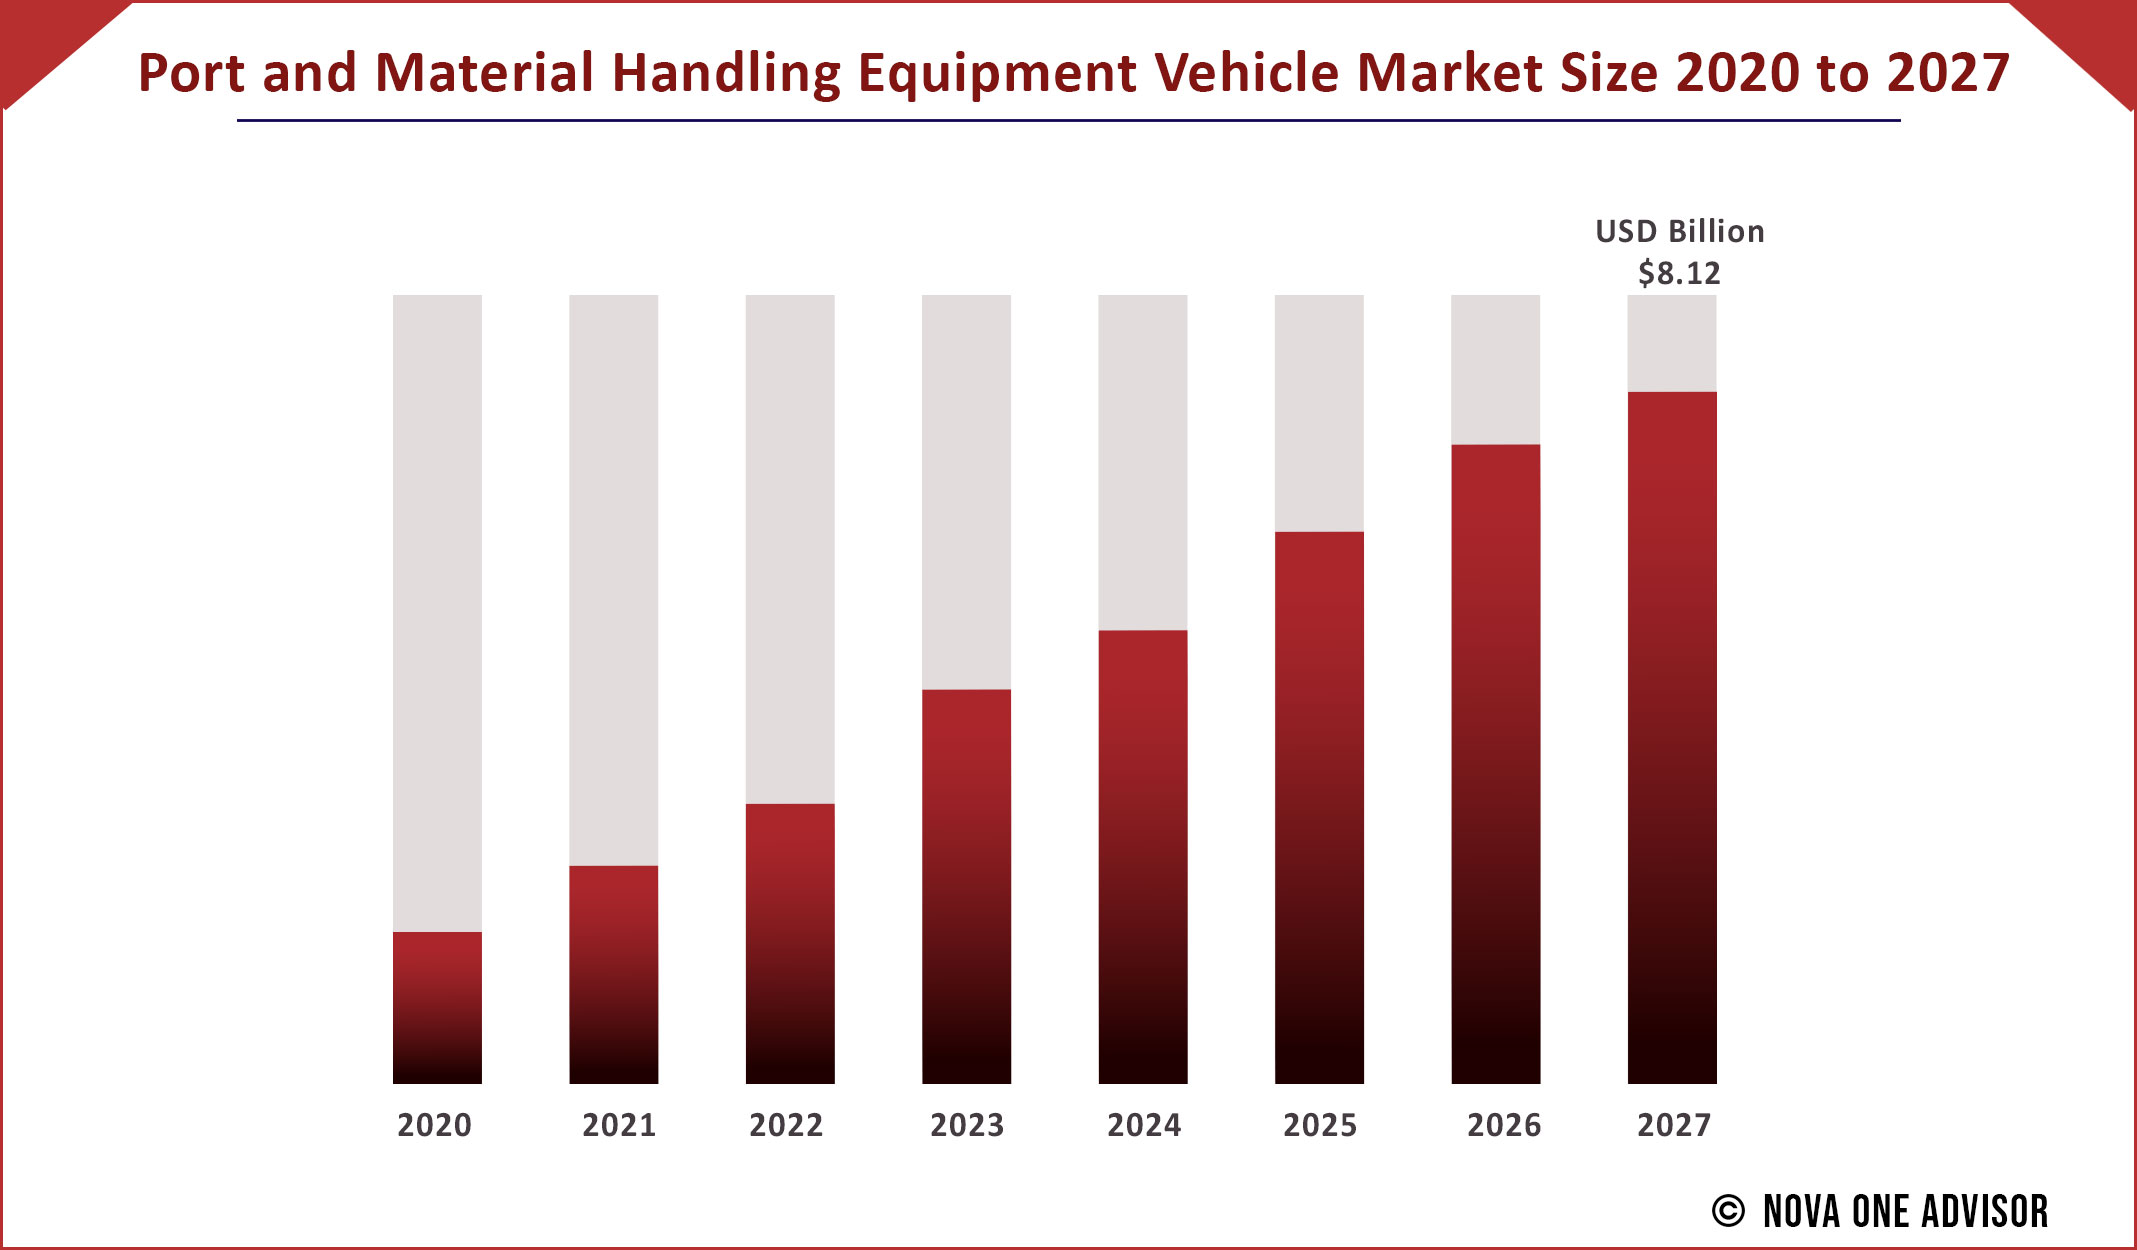 Port and Material Handling Equipment Vehicle Market Size 2020 to 2027